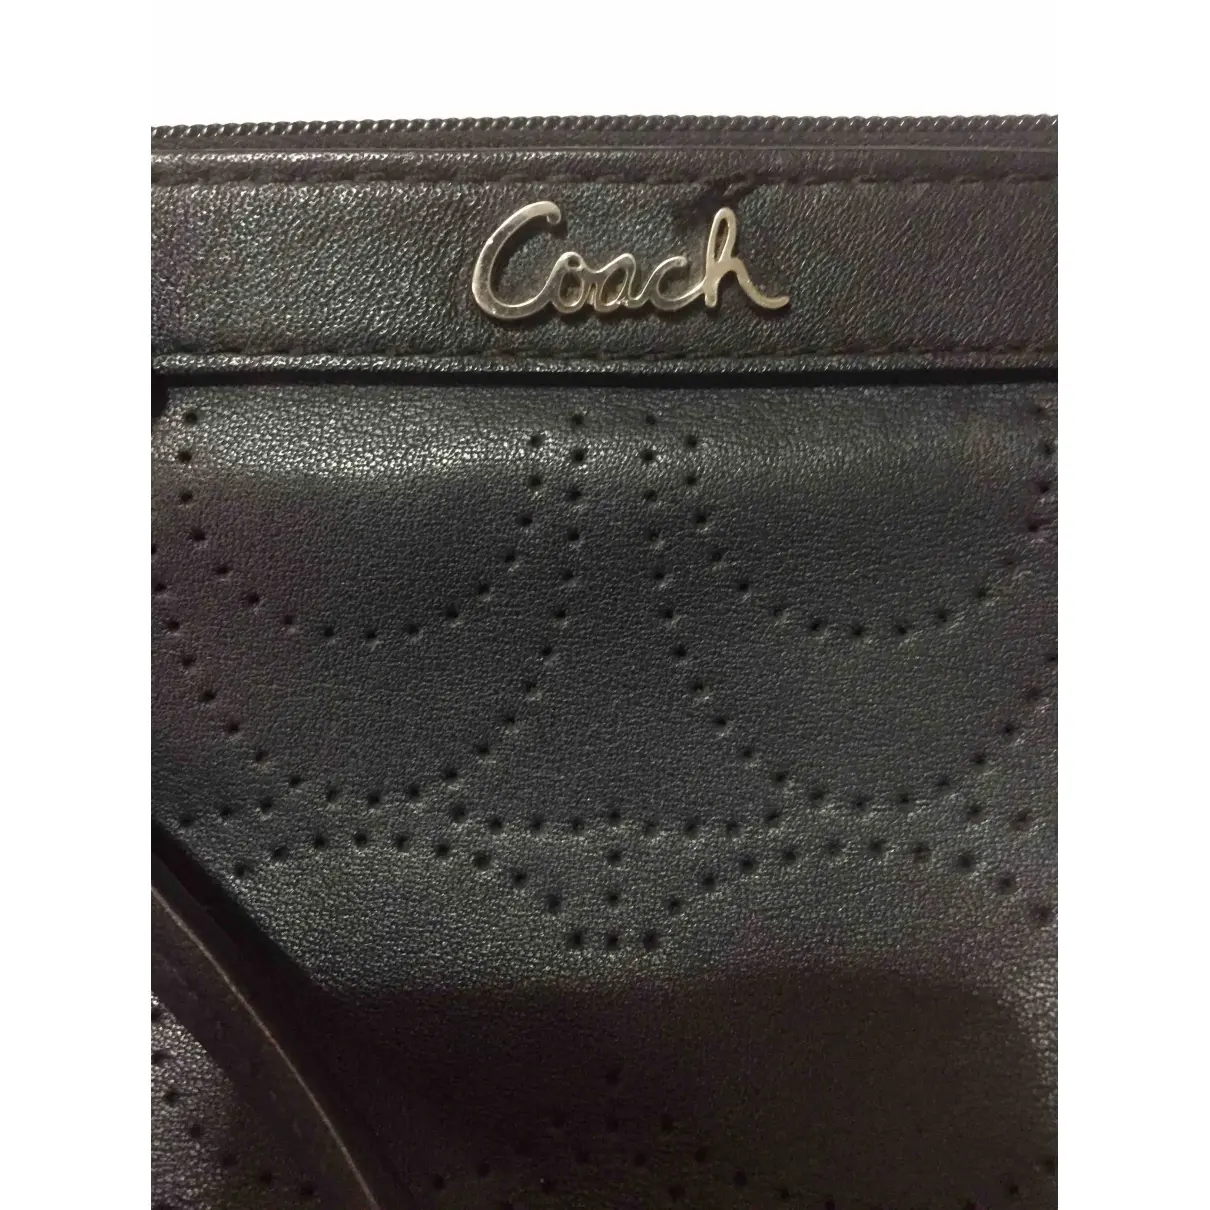 Buy Coach Leather purse online